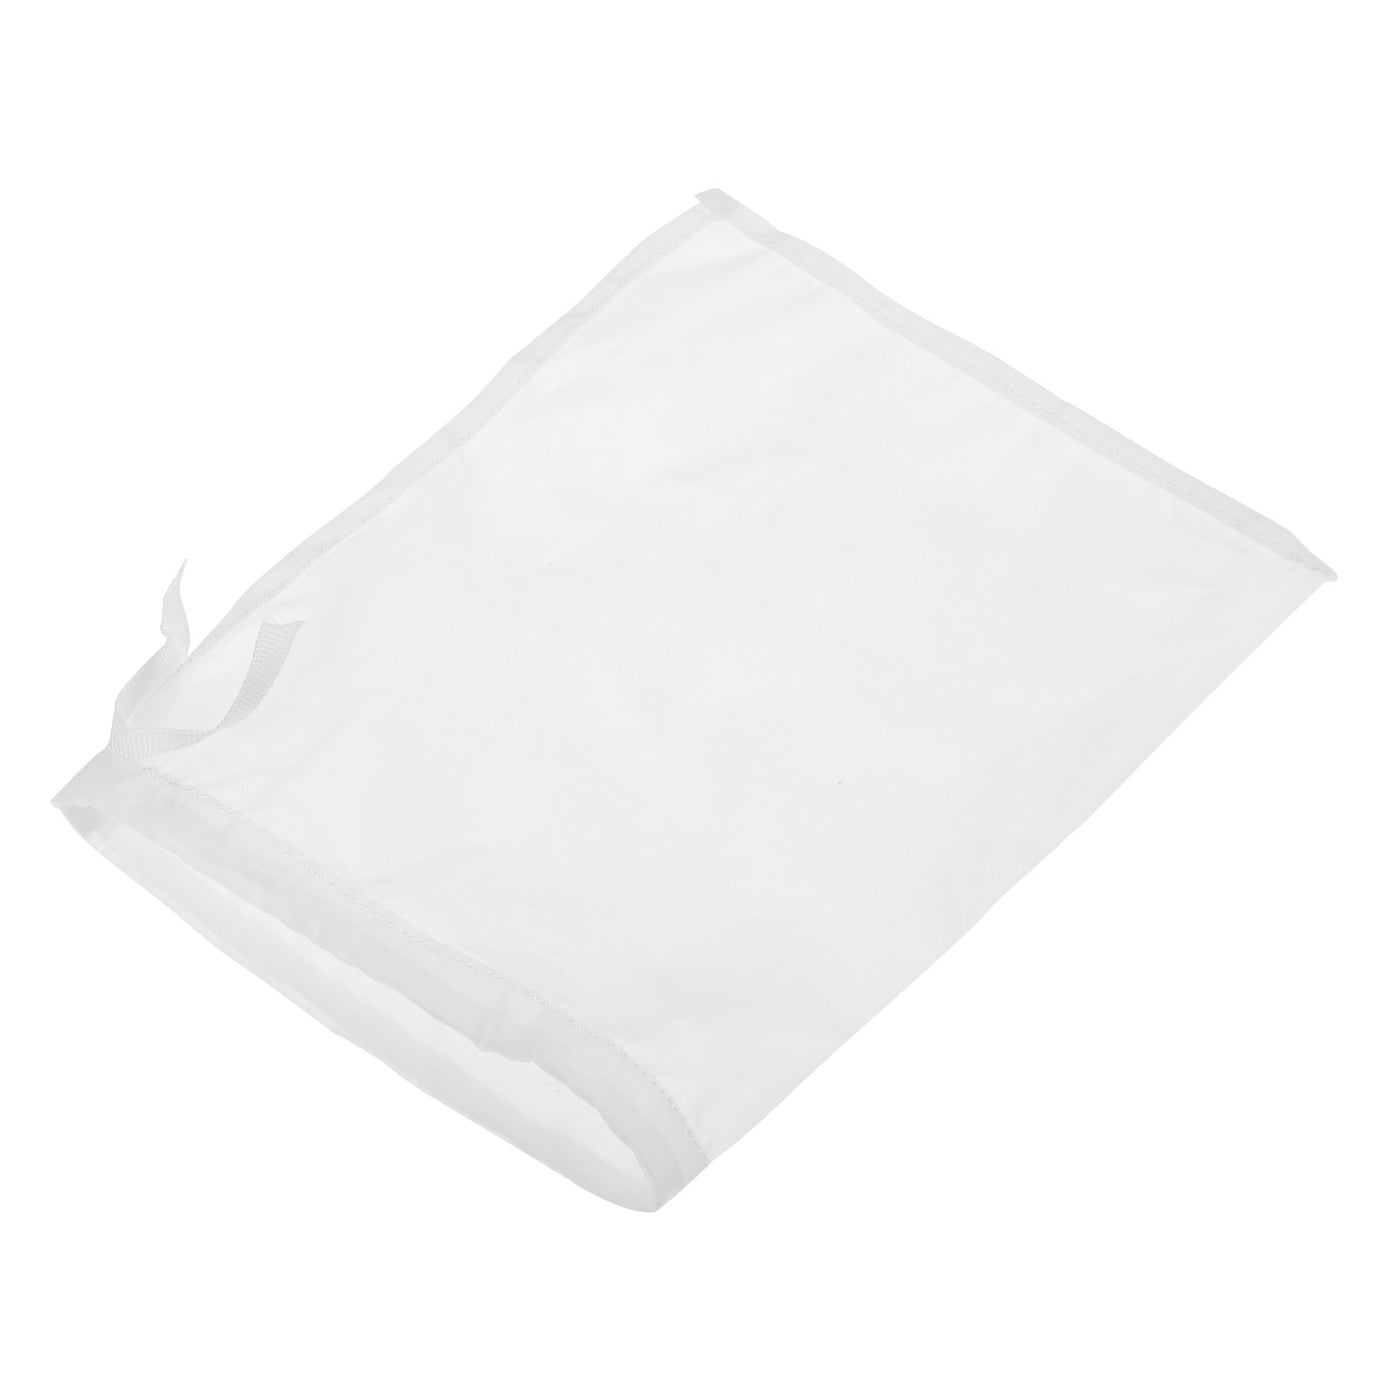 uxcell Uxcell Paint Filter Bag 300 Mesh (7.9"x5.9") Nylon Strainer for Filtering Paint